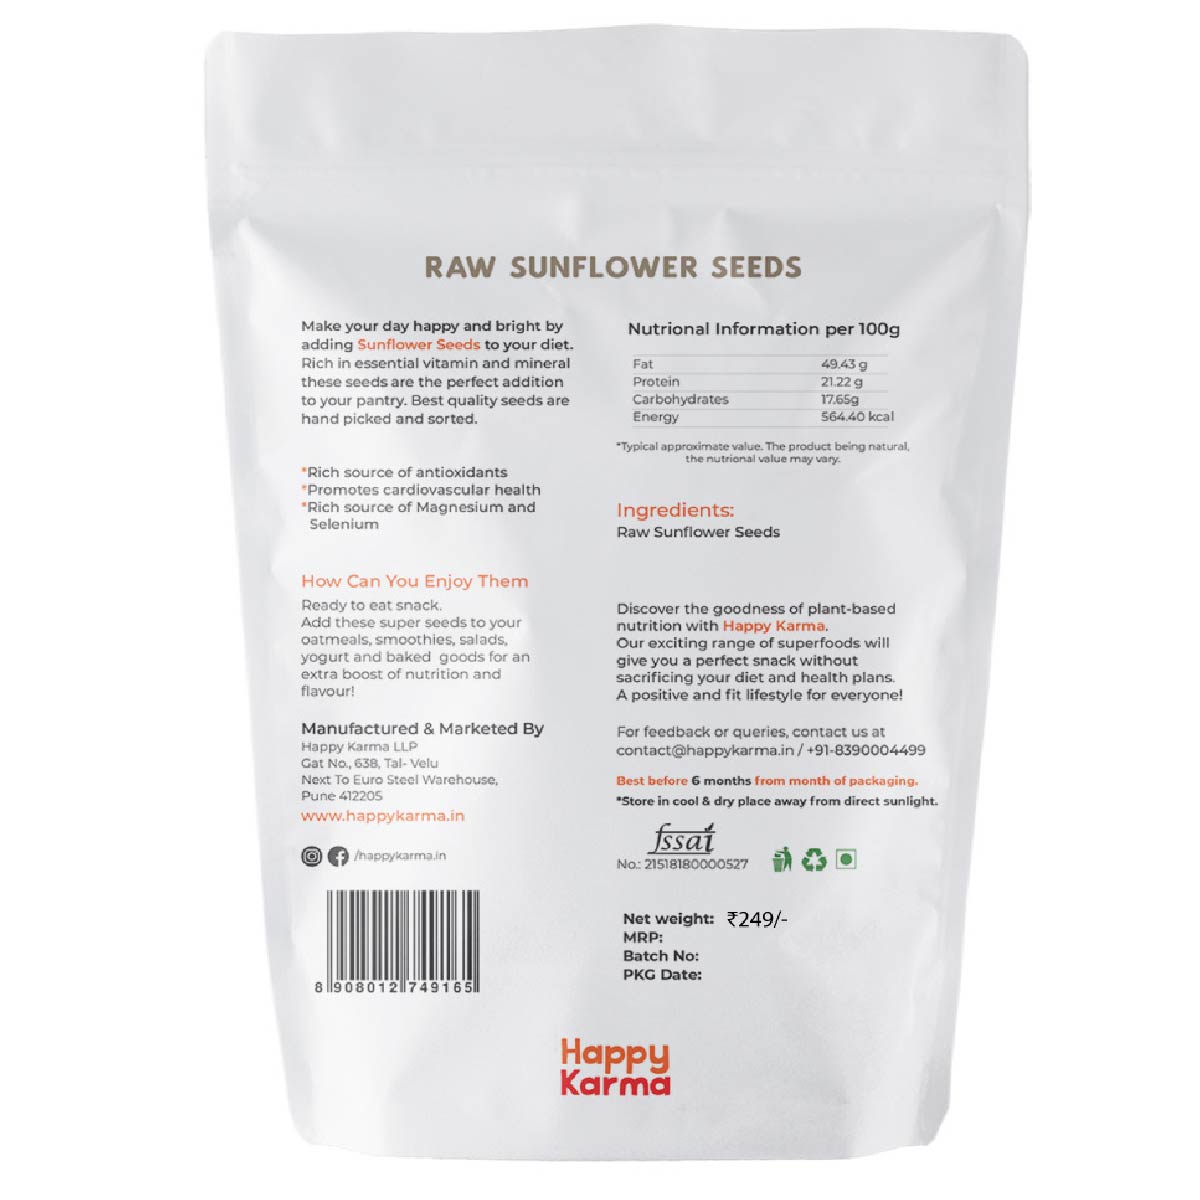 Happy Karma Sunflower Seeds 350g | Vitamin and Protein Rich | Raw Sunflower Seeds for Eating | Diet food | SuperSeeds | Superfood |